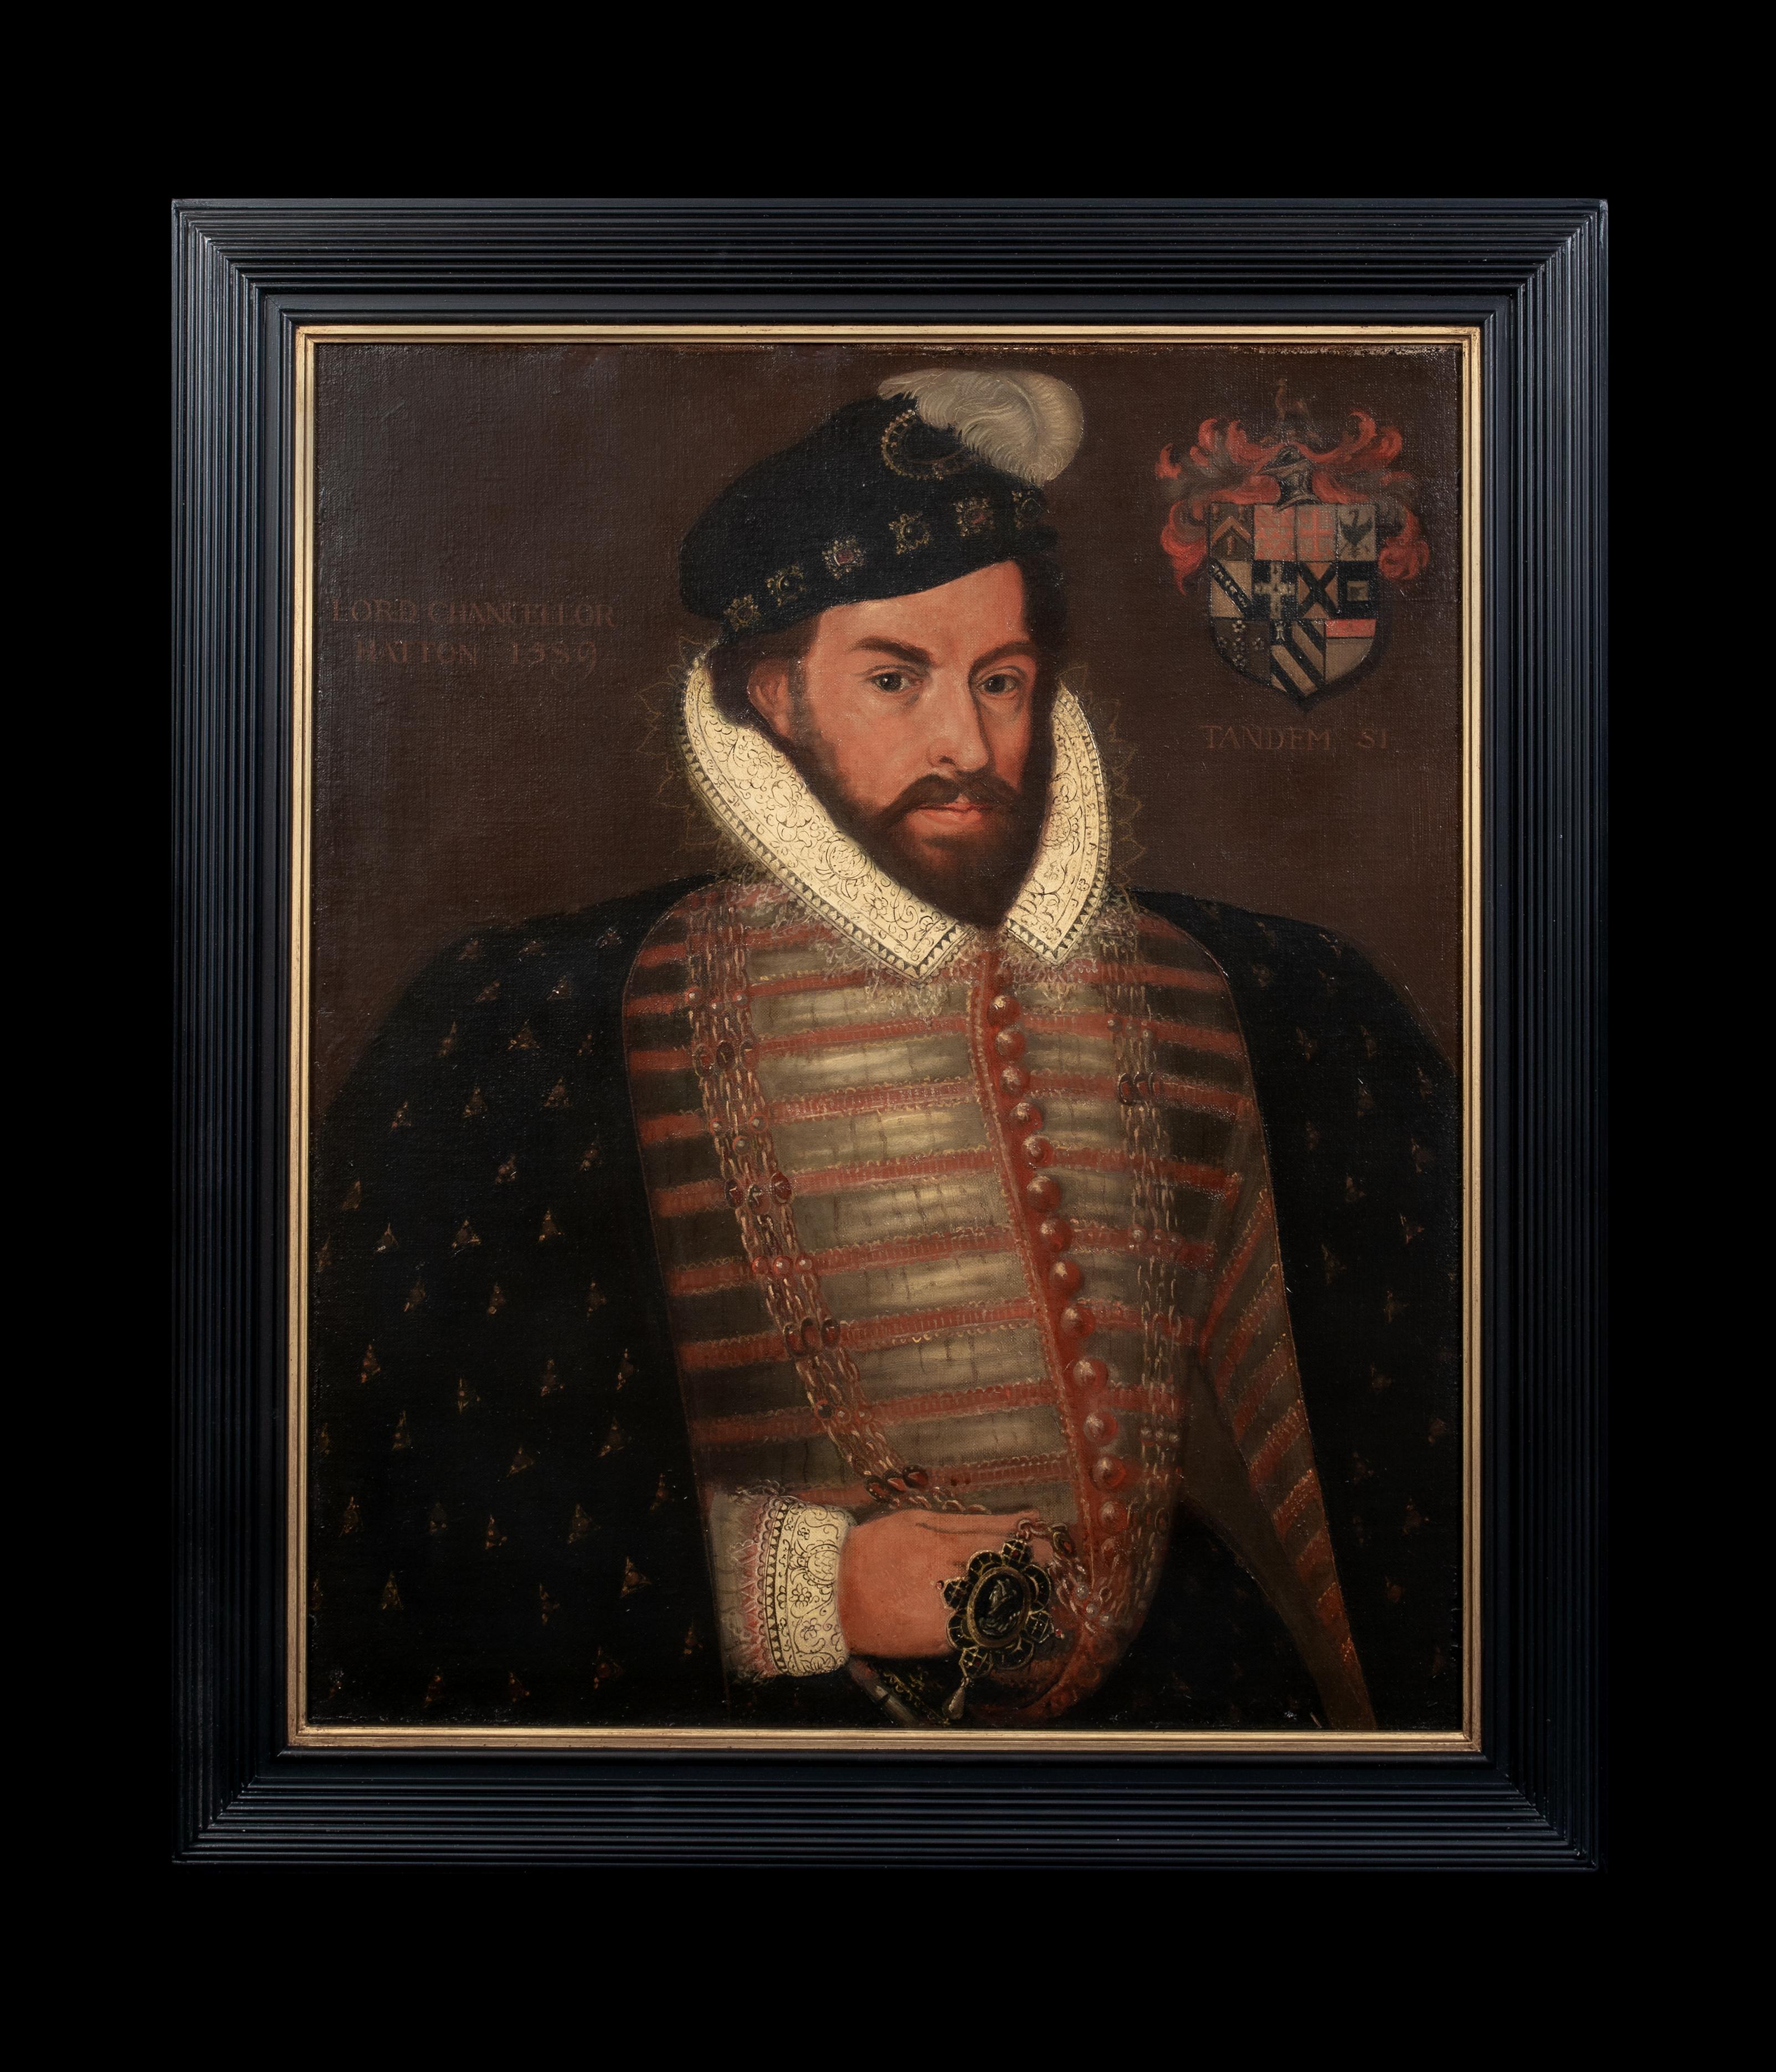  Sir Christopher Hatton Lord Chancellor To Queen Elizabeth I (1540-1591)  2